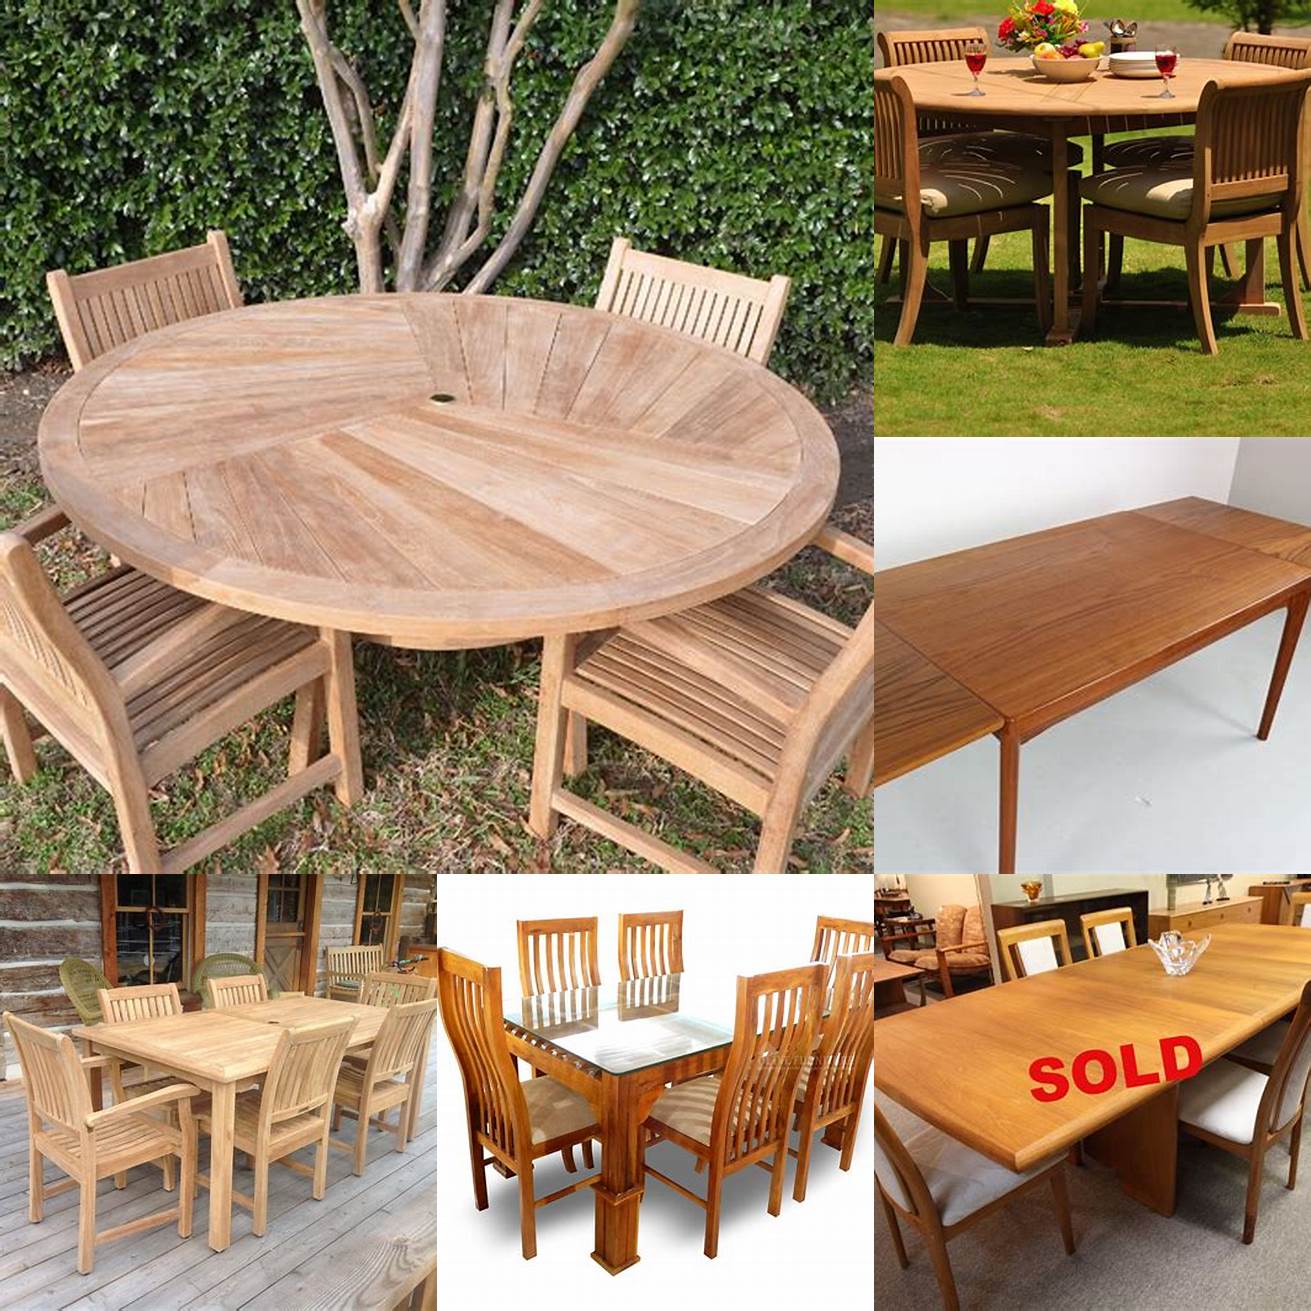 The Teak Dining Table